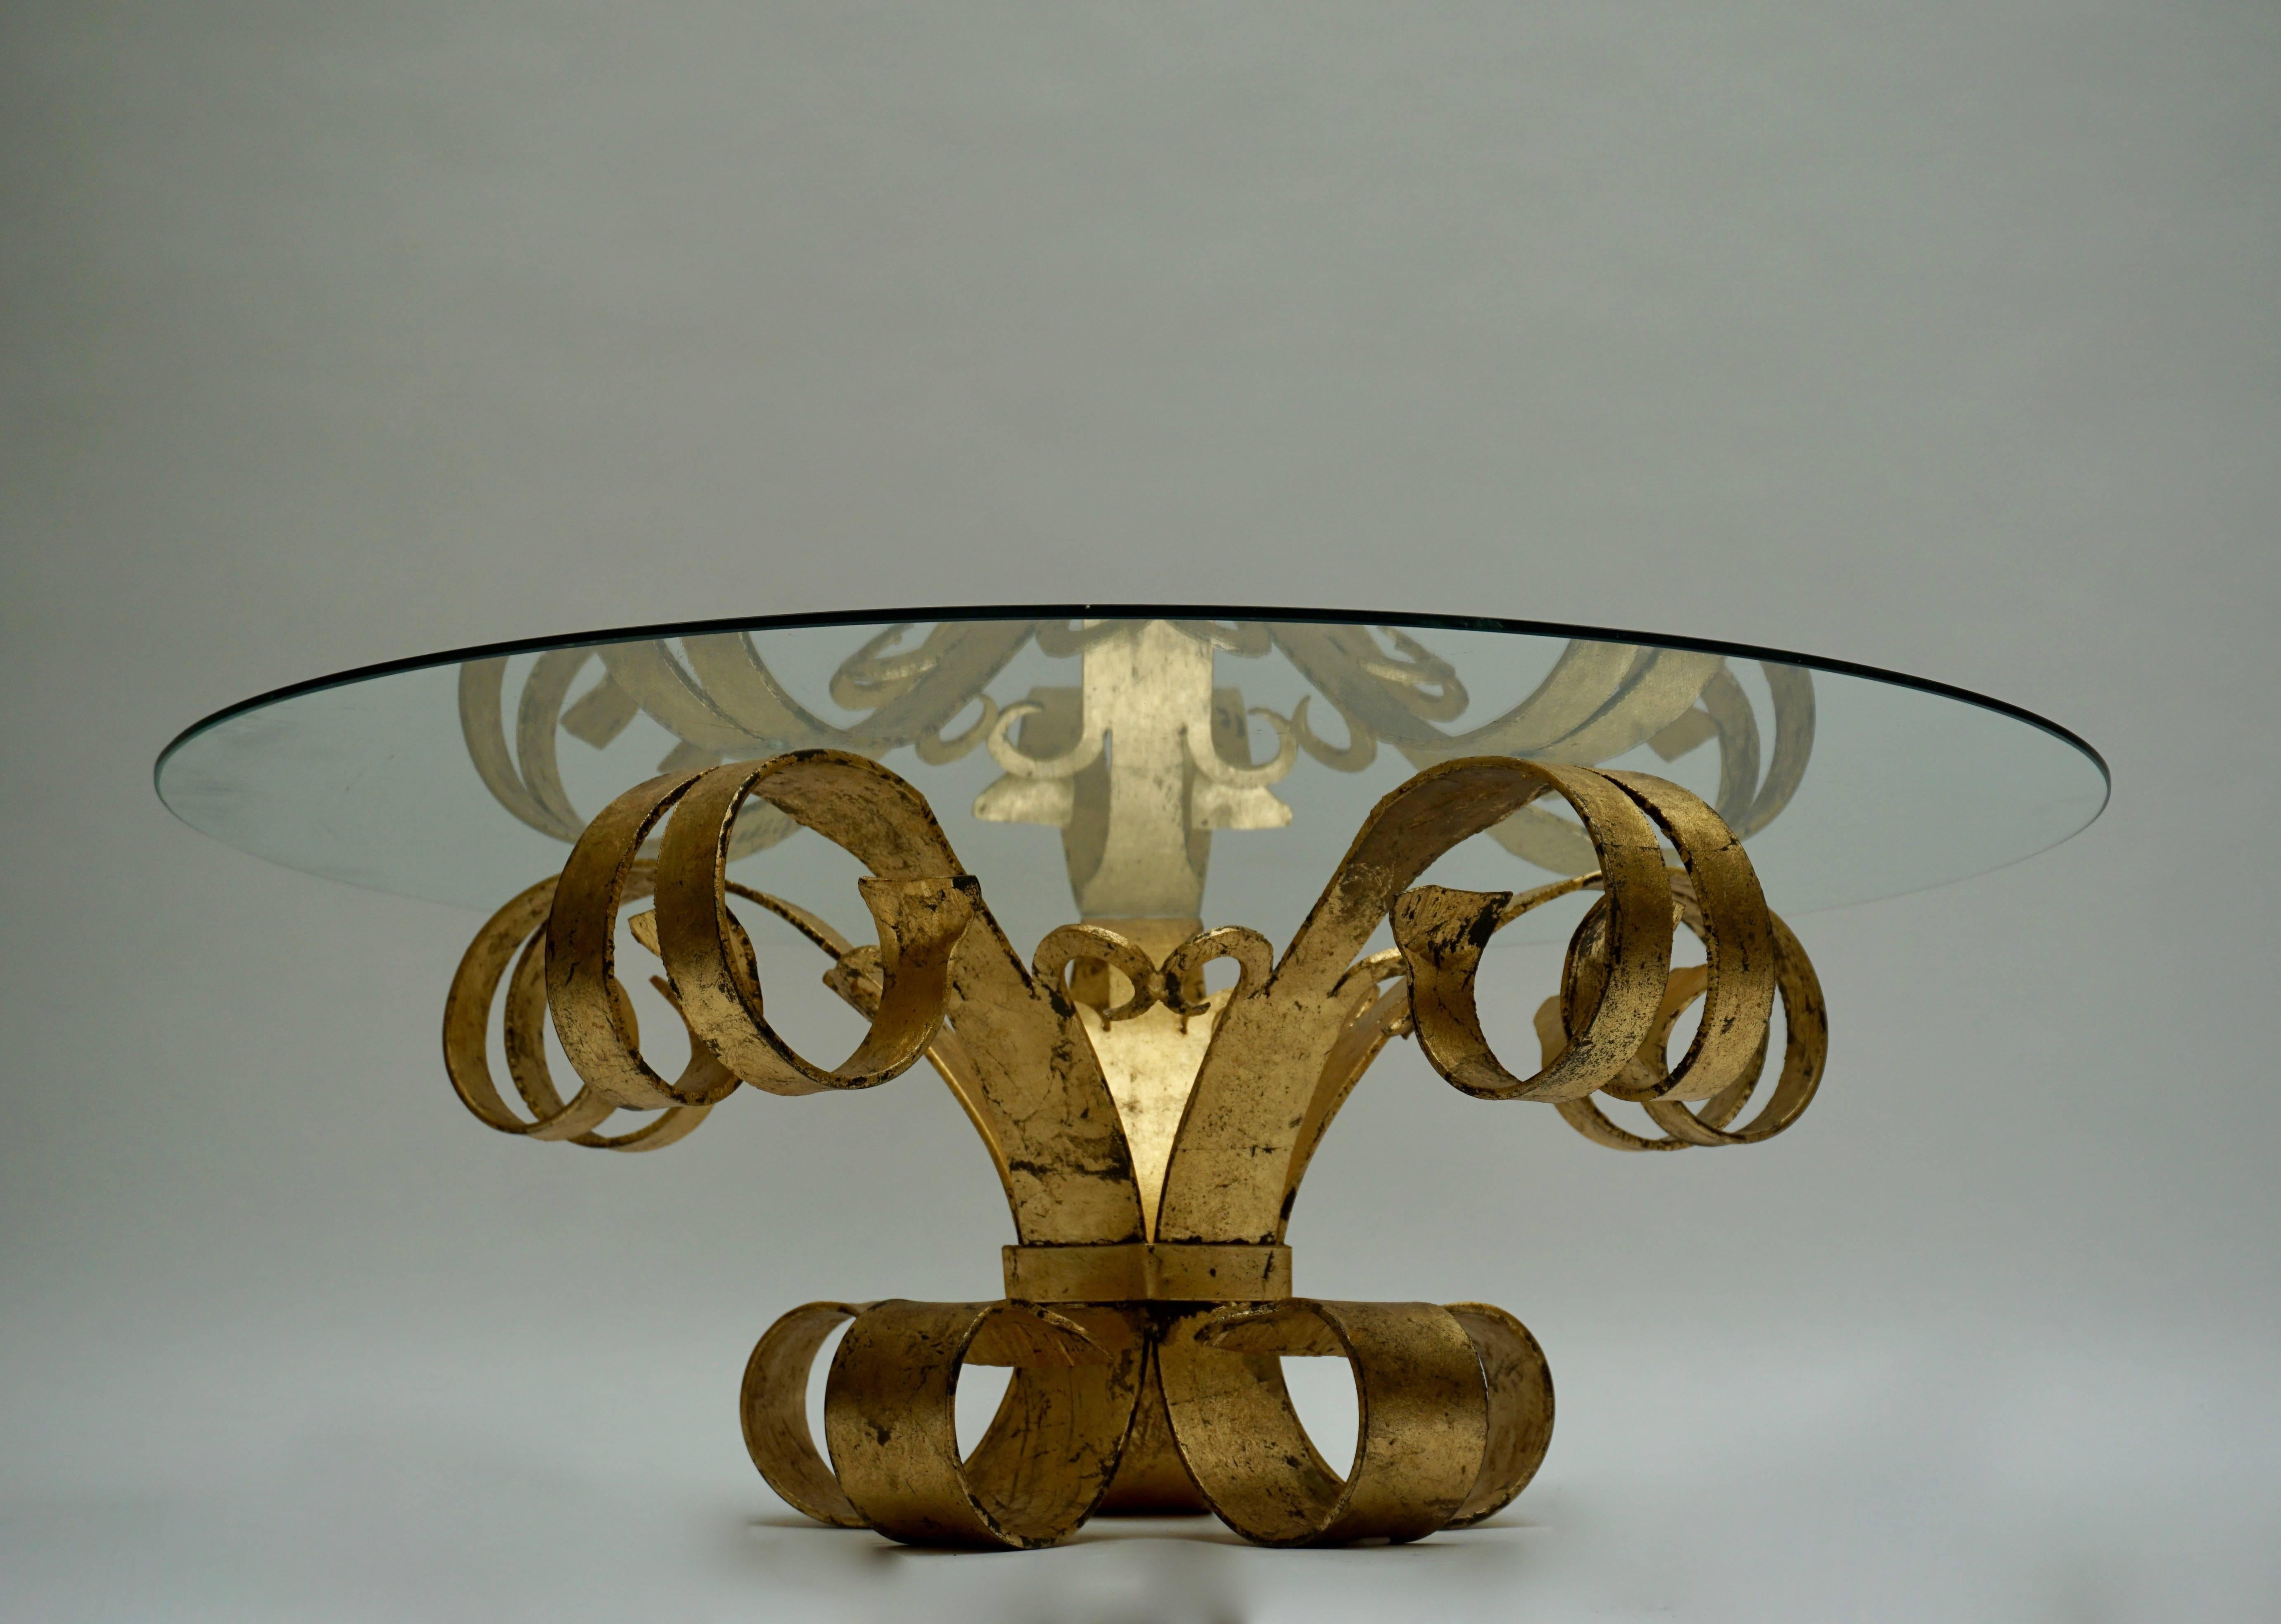 Elegant Italian gilded coffee table with glass top.
Diameter with glass top: 105 cm.
Height: 39 cm.
Diameter base: 60 cm.